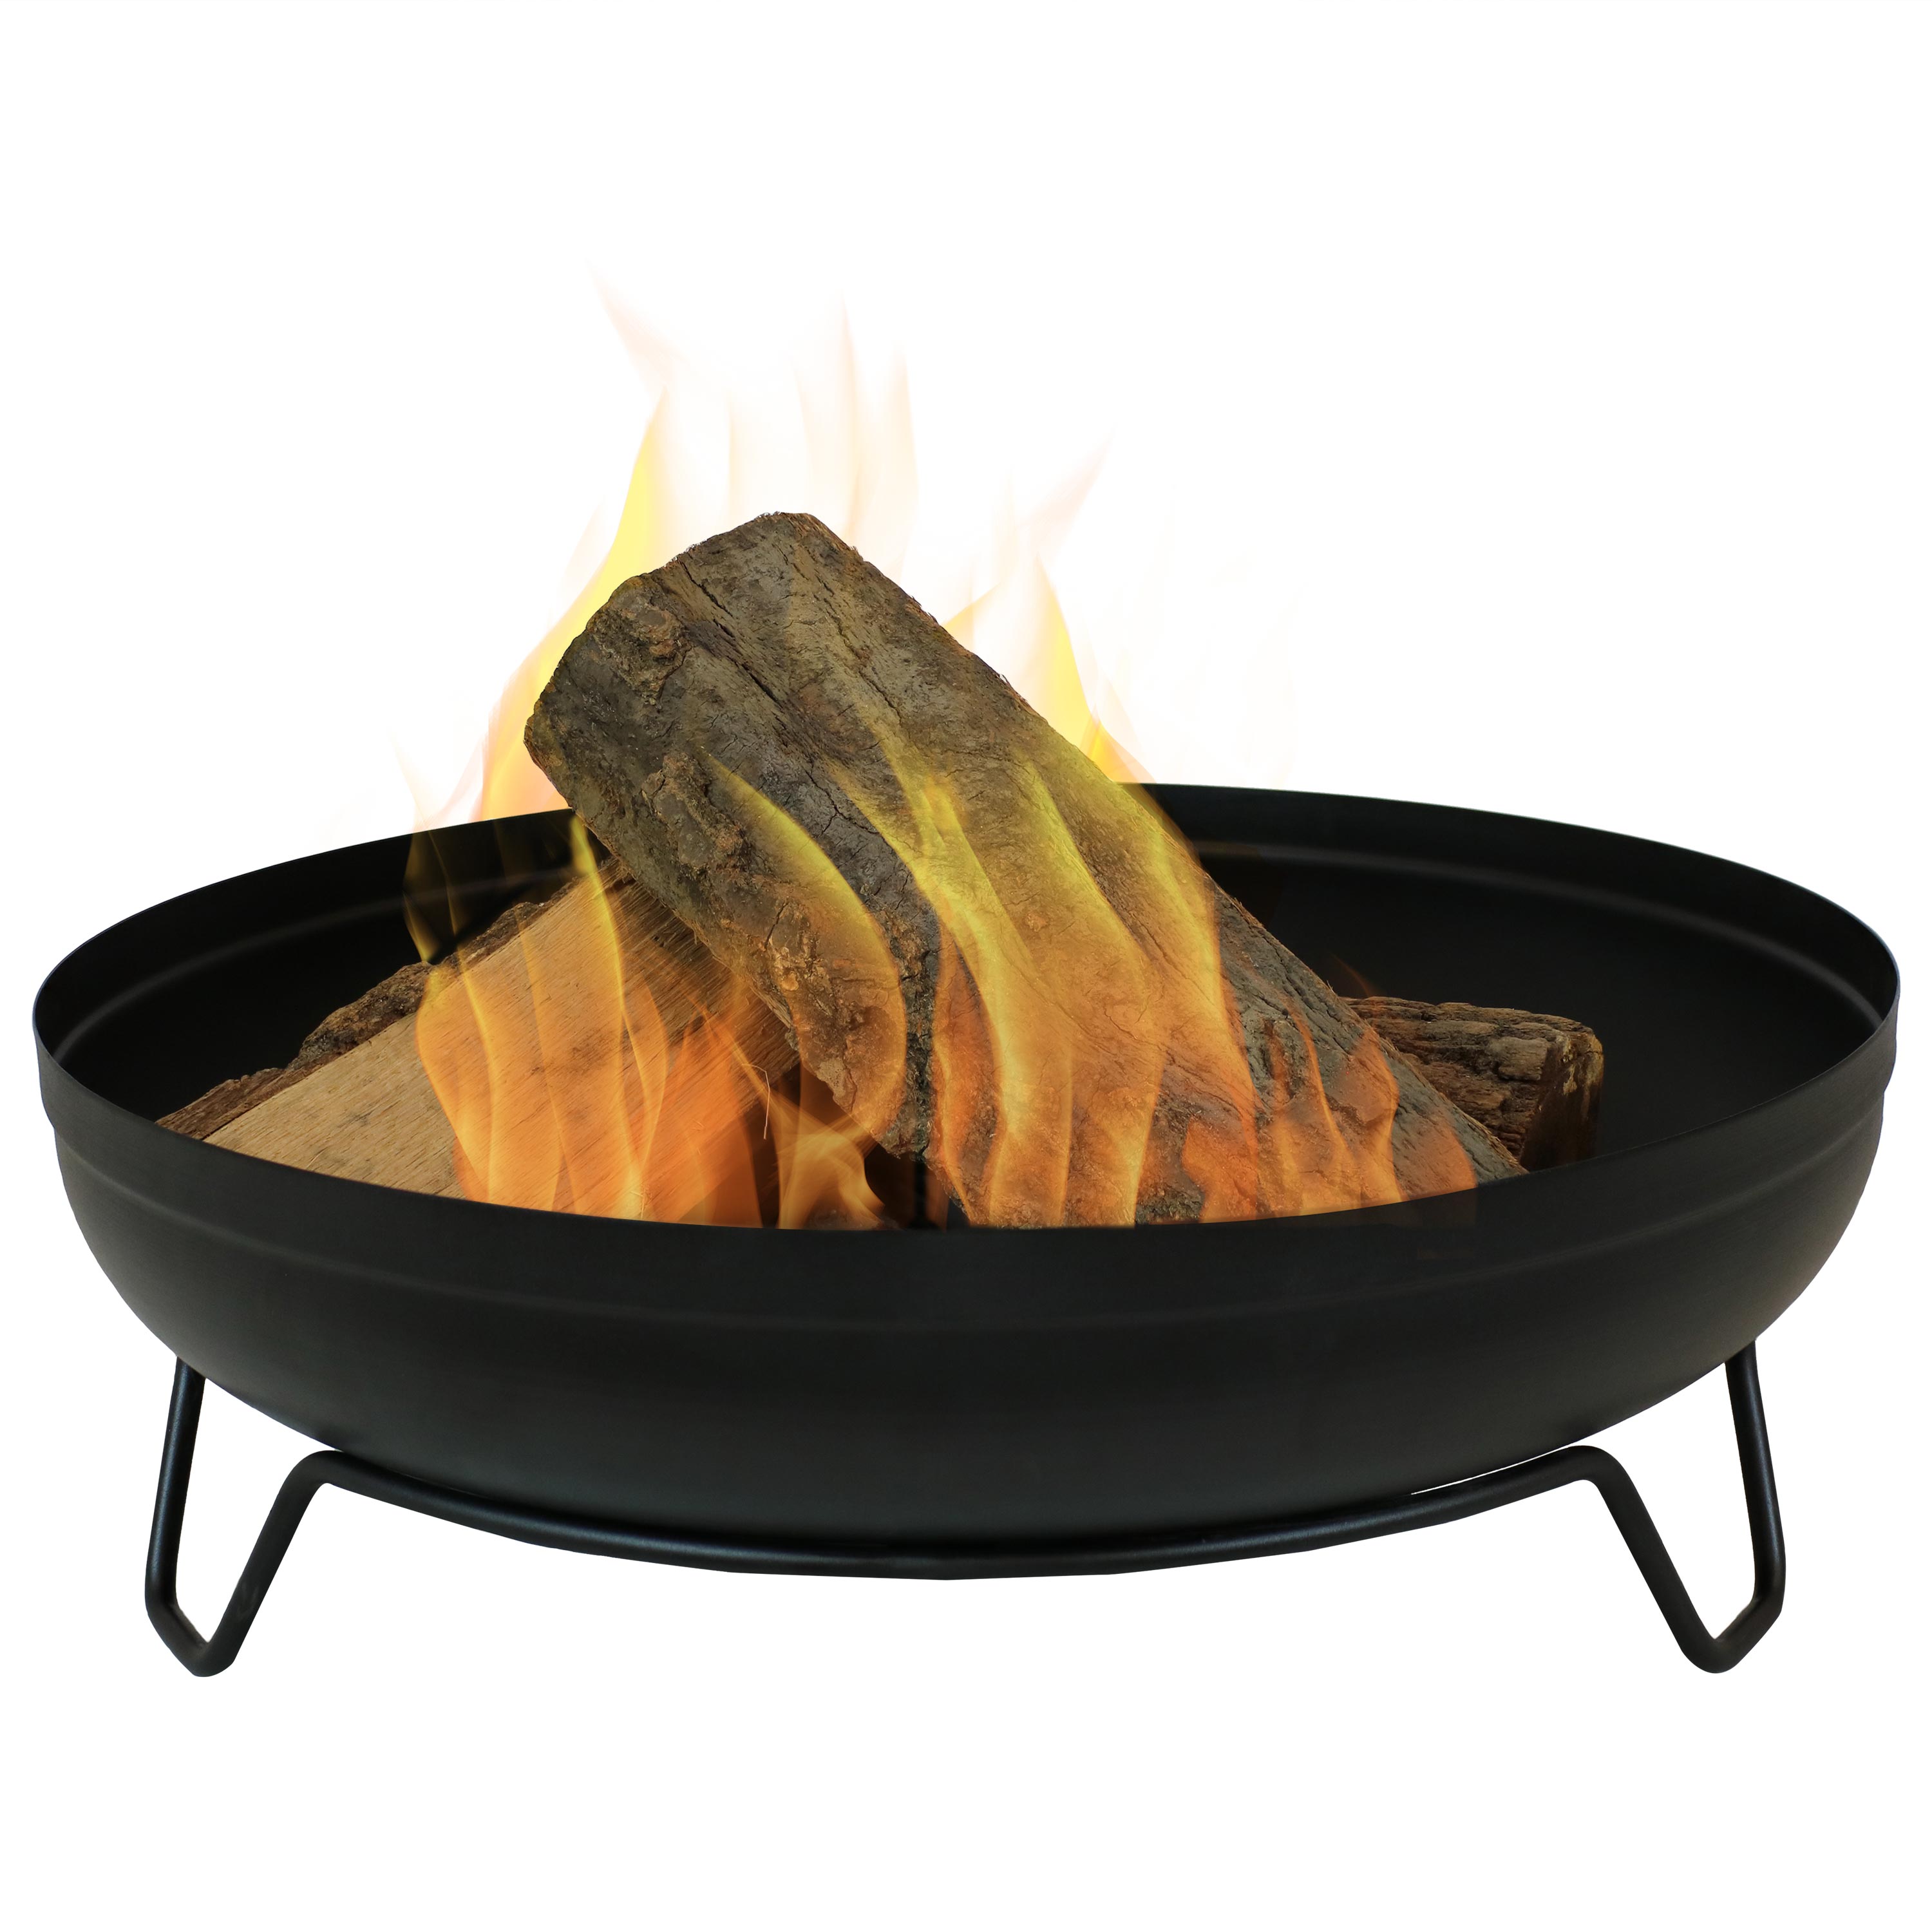 Sunnydaze Black Wood-Burning Fire Pit Bowl with Stand - 23-Inch